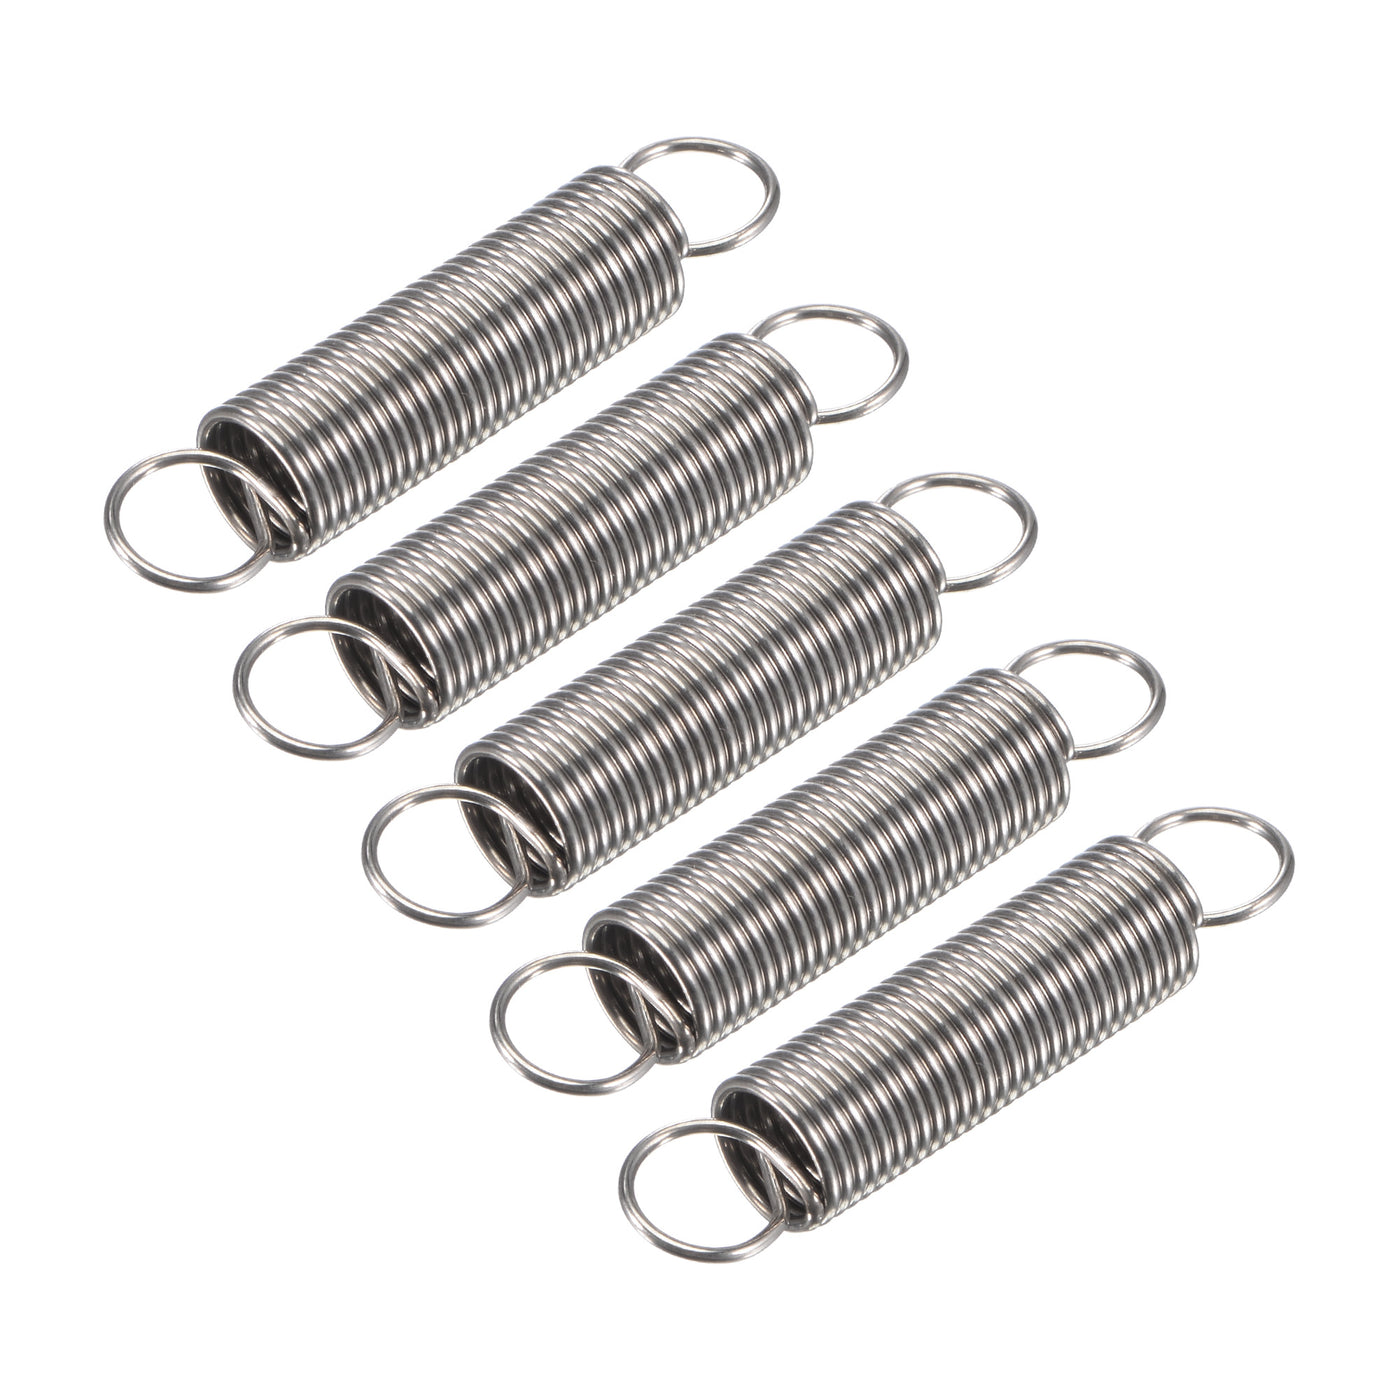 Uxcell Uxcell 1mmx10mmx50mm Extended Compression Spring,3.4Lbs Load Capacity,Silver,5pcs